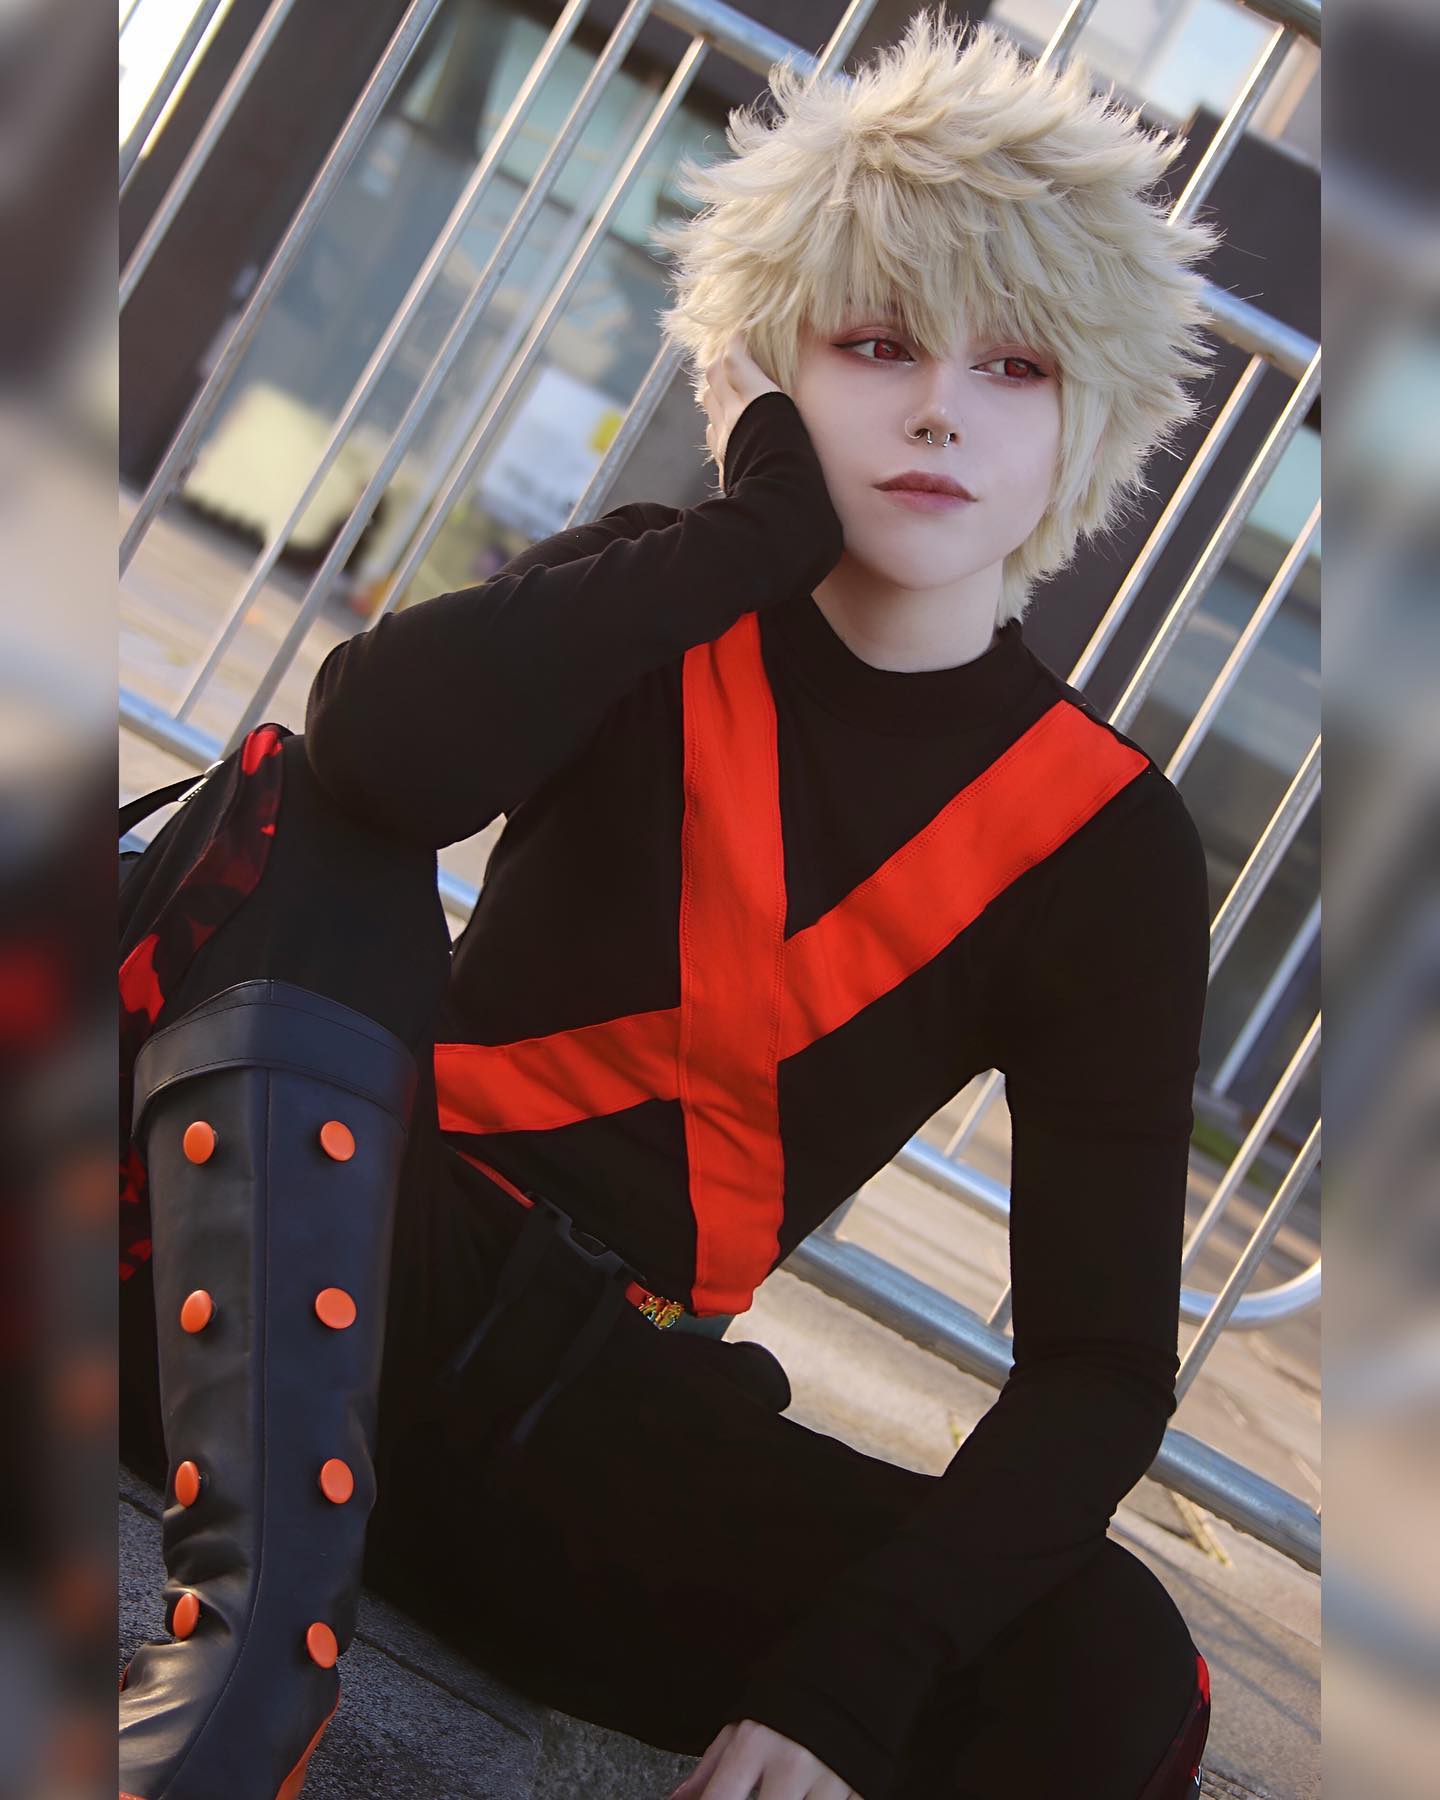 💥Damn I hate fighting in the winter💥
~
“winter’s crap” 🤪 lmaoo its too fitting i hate winter too, so glad i could bring back my bakugo! i really missed cosplaying him although it was still just casual haha
~
✨cosplayer: @riotwolf.cos 
❄️character: bakugo
✨anime: boku no hero academia
~
❄️wig: @coscraftuk 
✨top: made by me
❄️trousers: @nevstudiostreetwear 
📸 @hyper.cos 
~
~
~
#bakugo #bakugoukatsuki #bakugou #bakugoucosplay #bakugoukatsukicosplay #myheroacademia #myheroacademiacosplay #bokunoheroacademia #bokunoheroacademiacosplay #bnha #bnhacosplay #mcmcomiccon